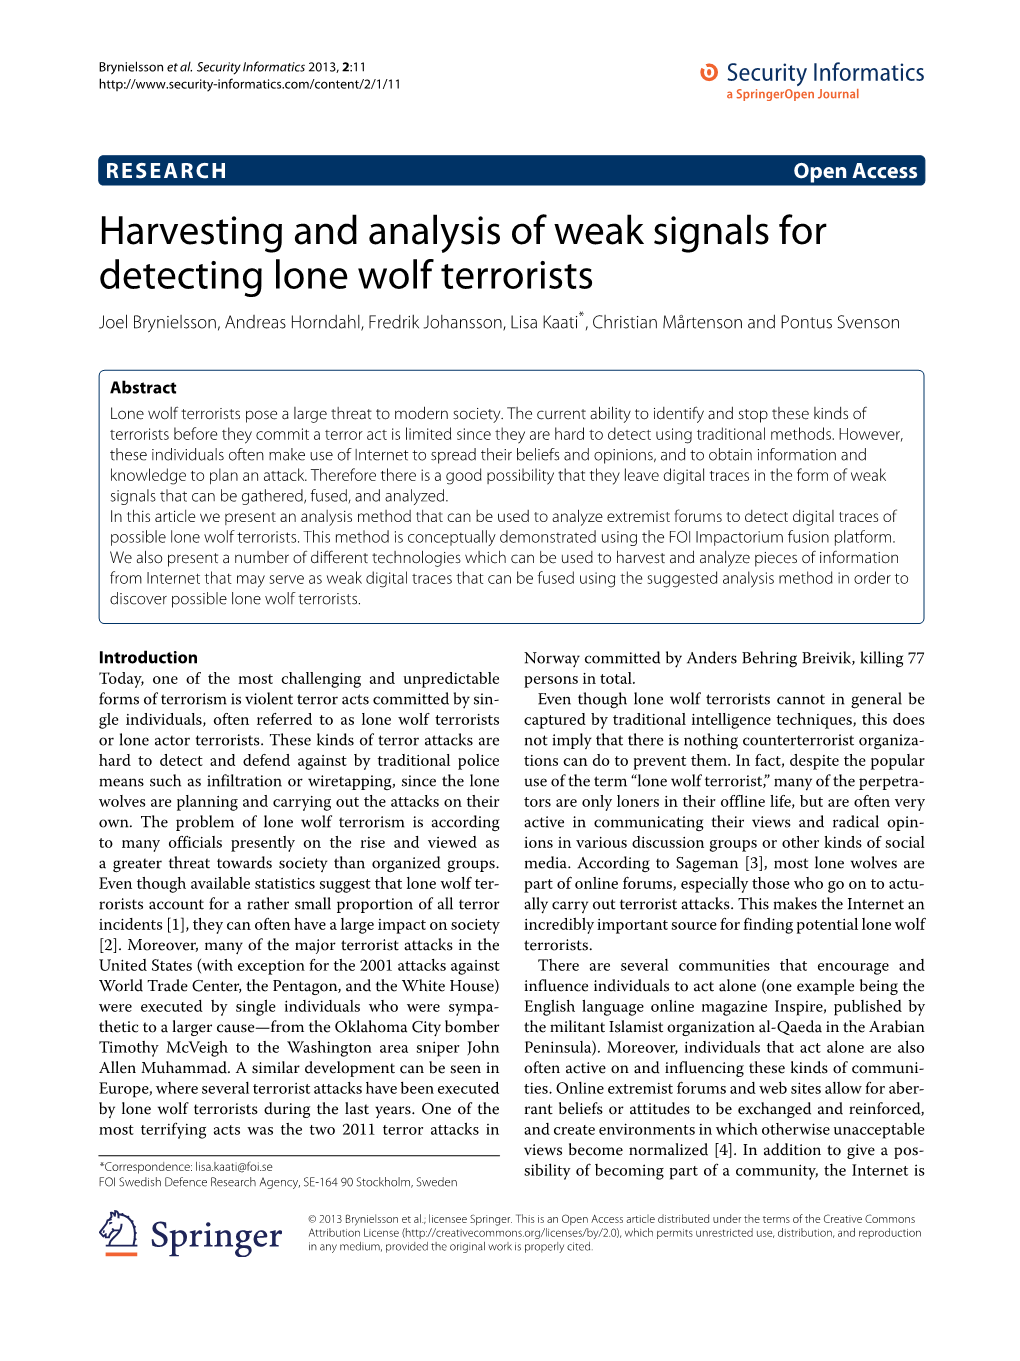 Harvesting and Analysis of Weak Signals for Detecting Lone Wolf